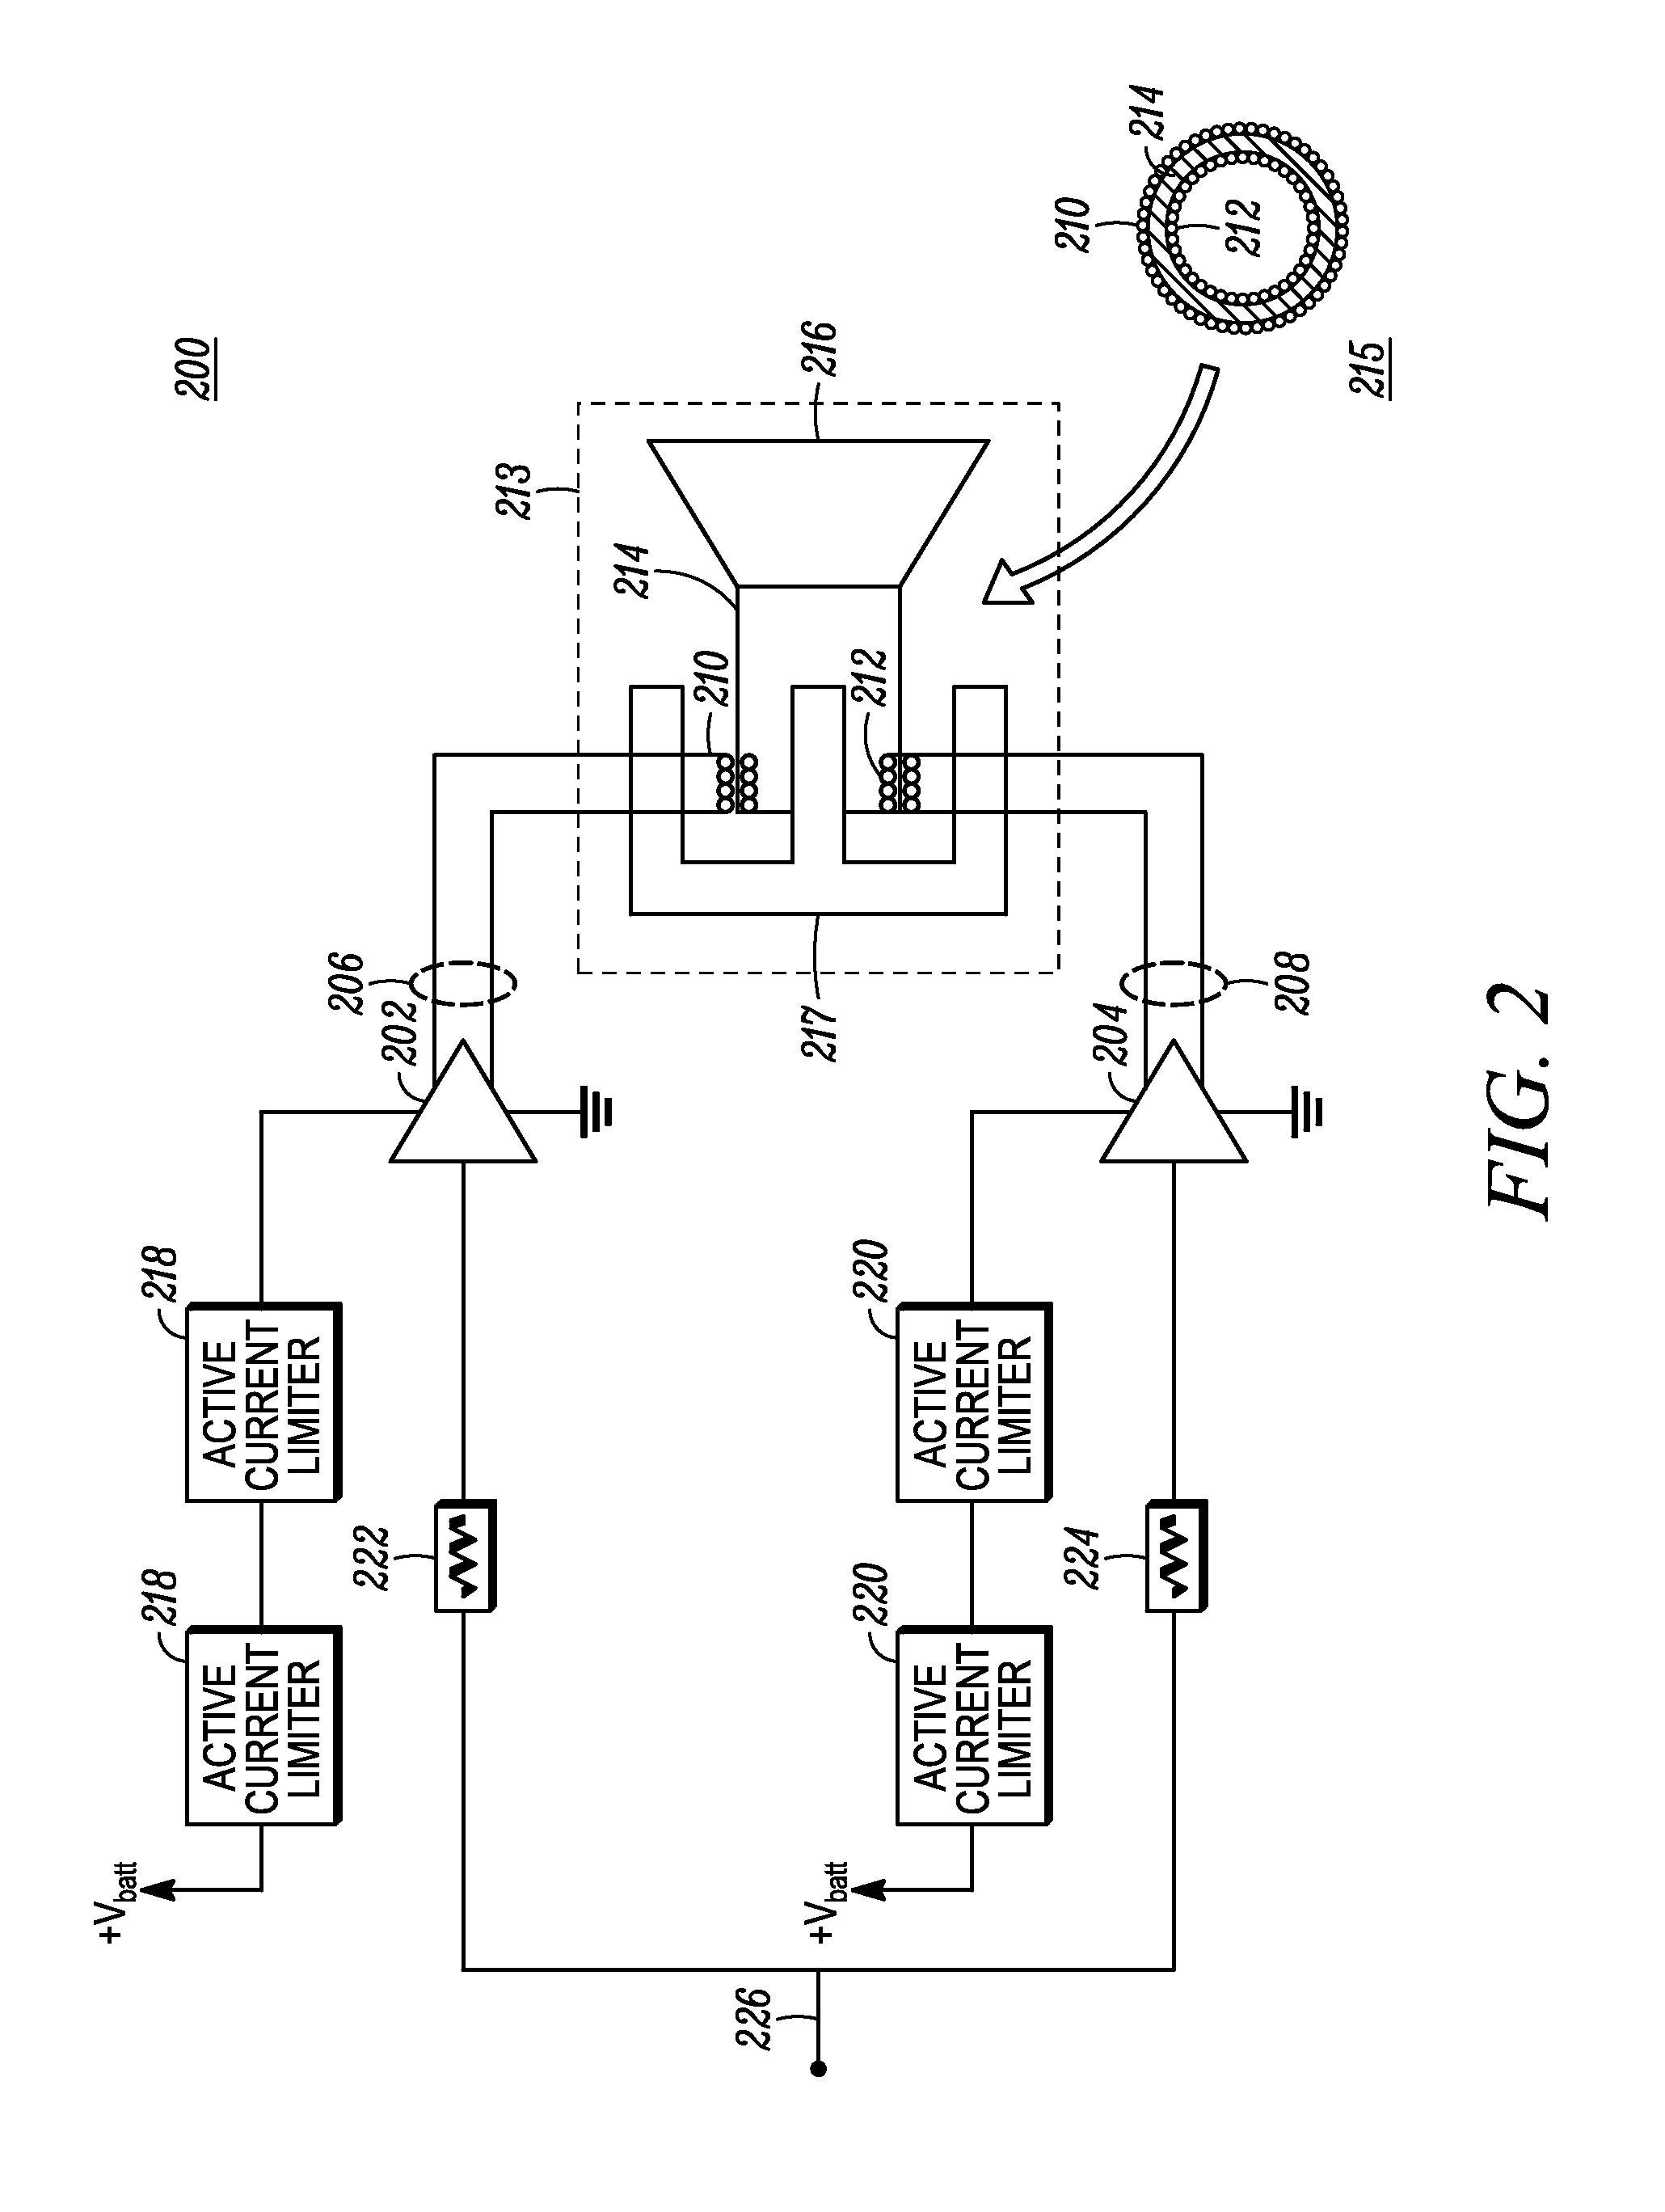 Intrinsically safe audio circuit for a portable two-way radio